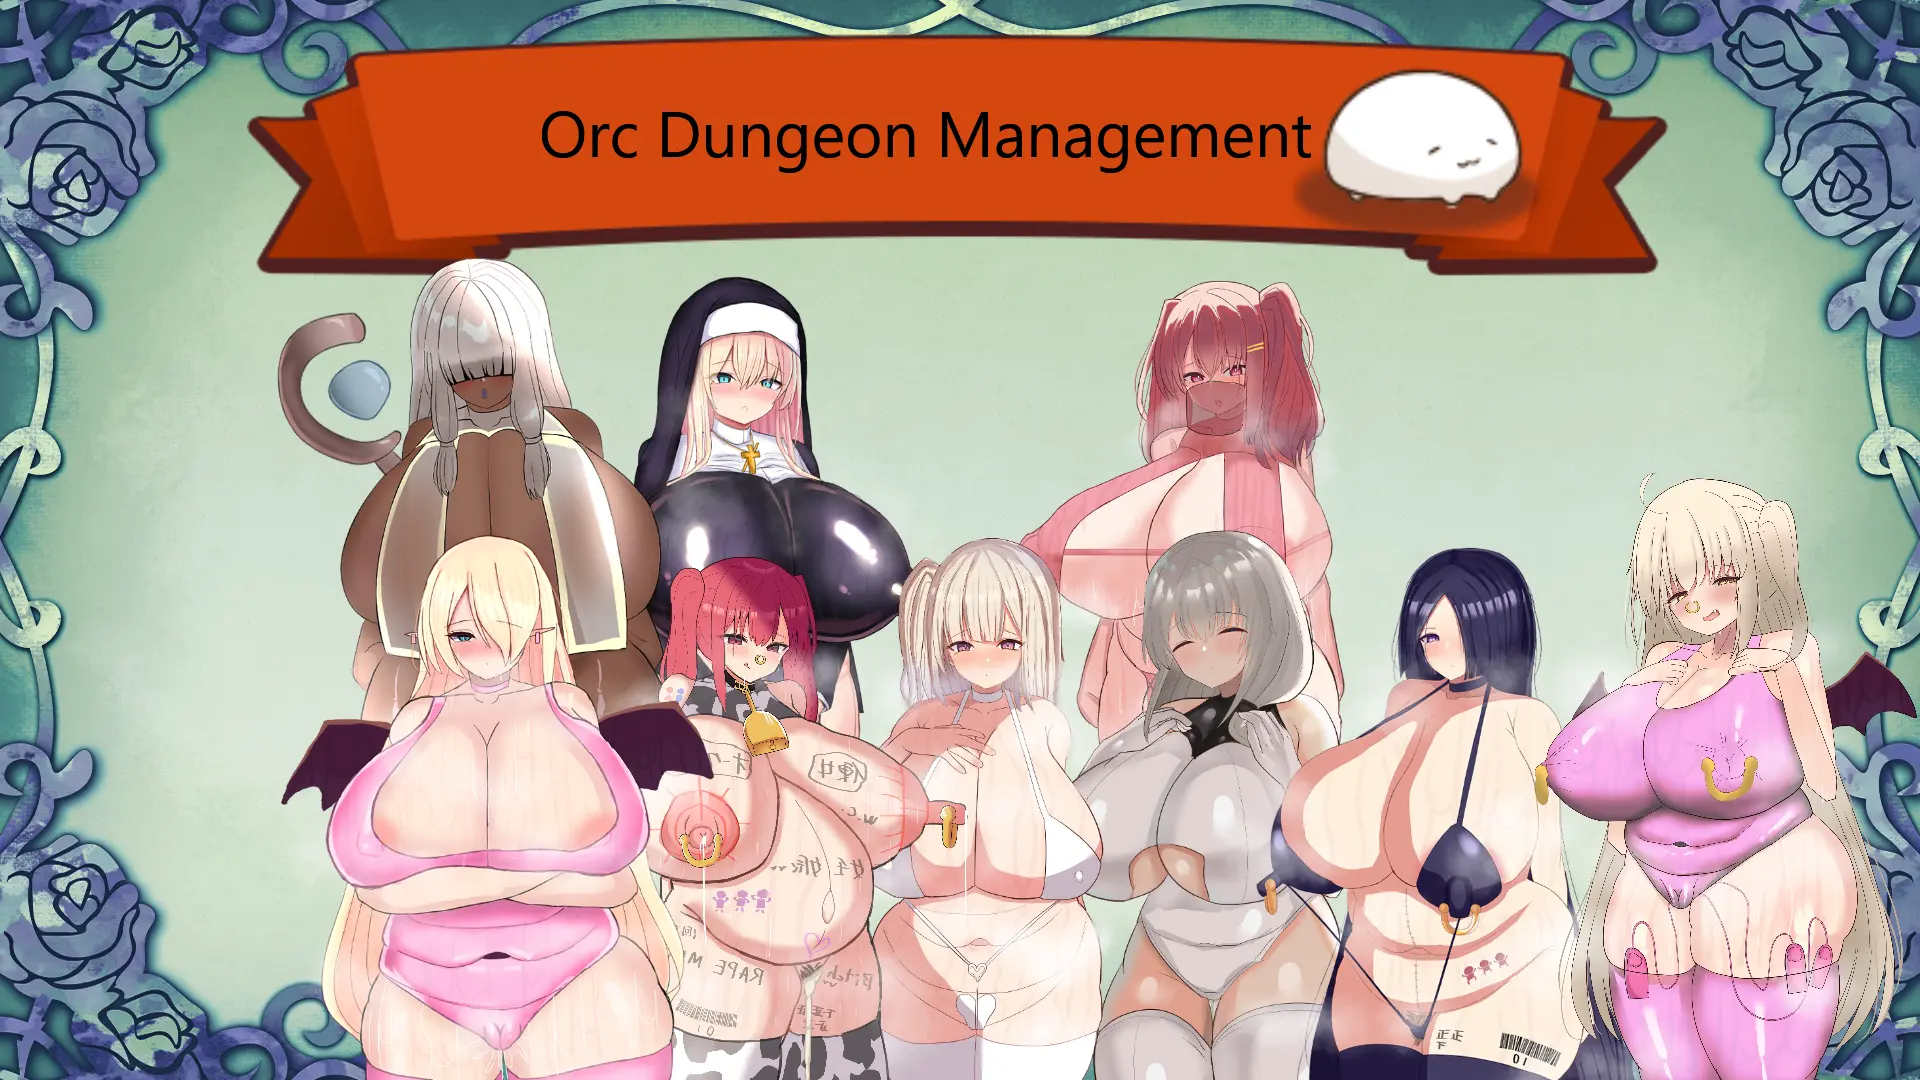 Orc Dungeon Management main image